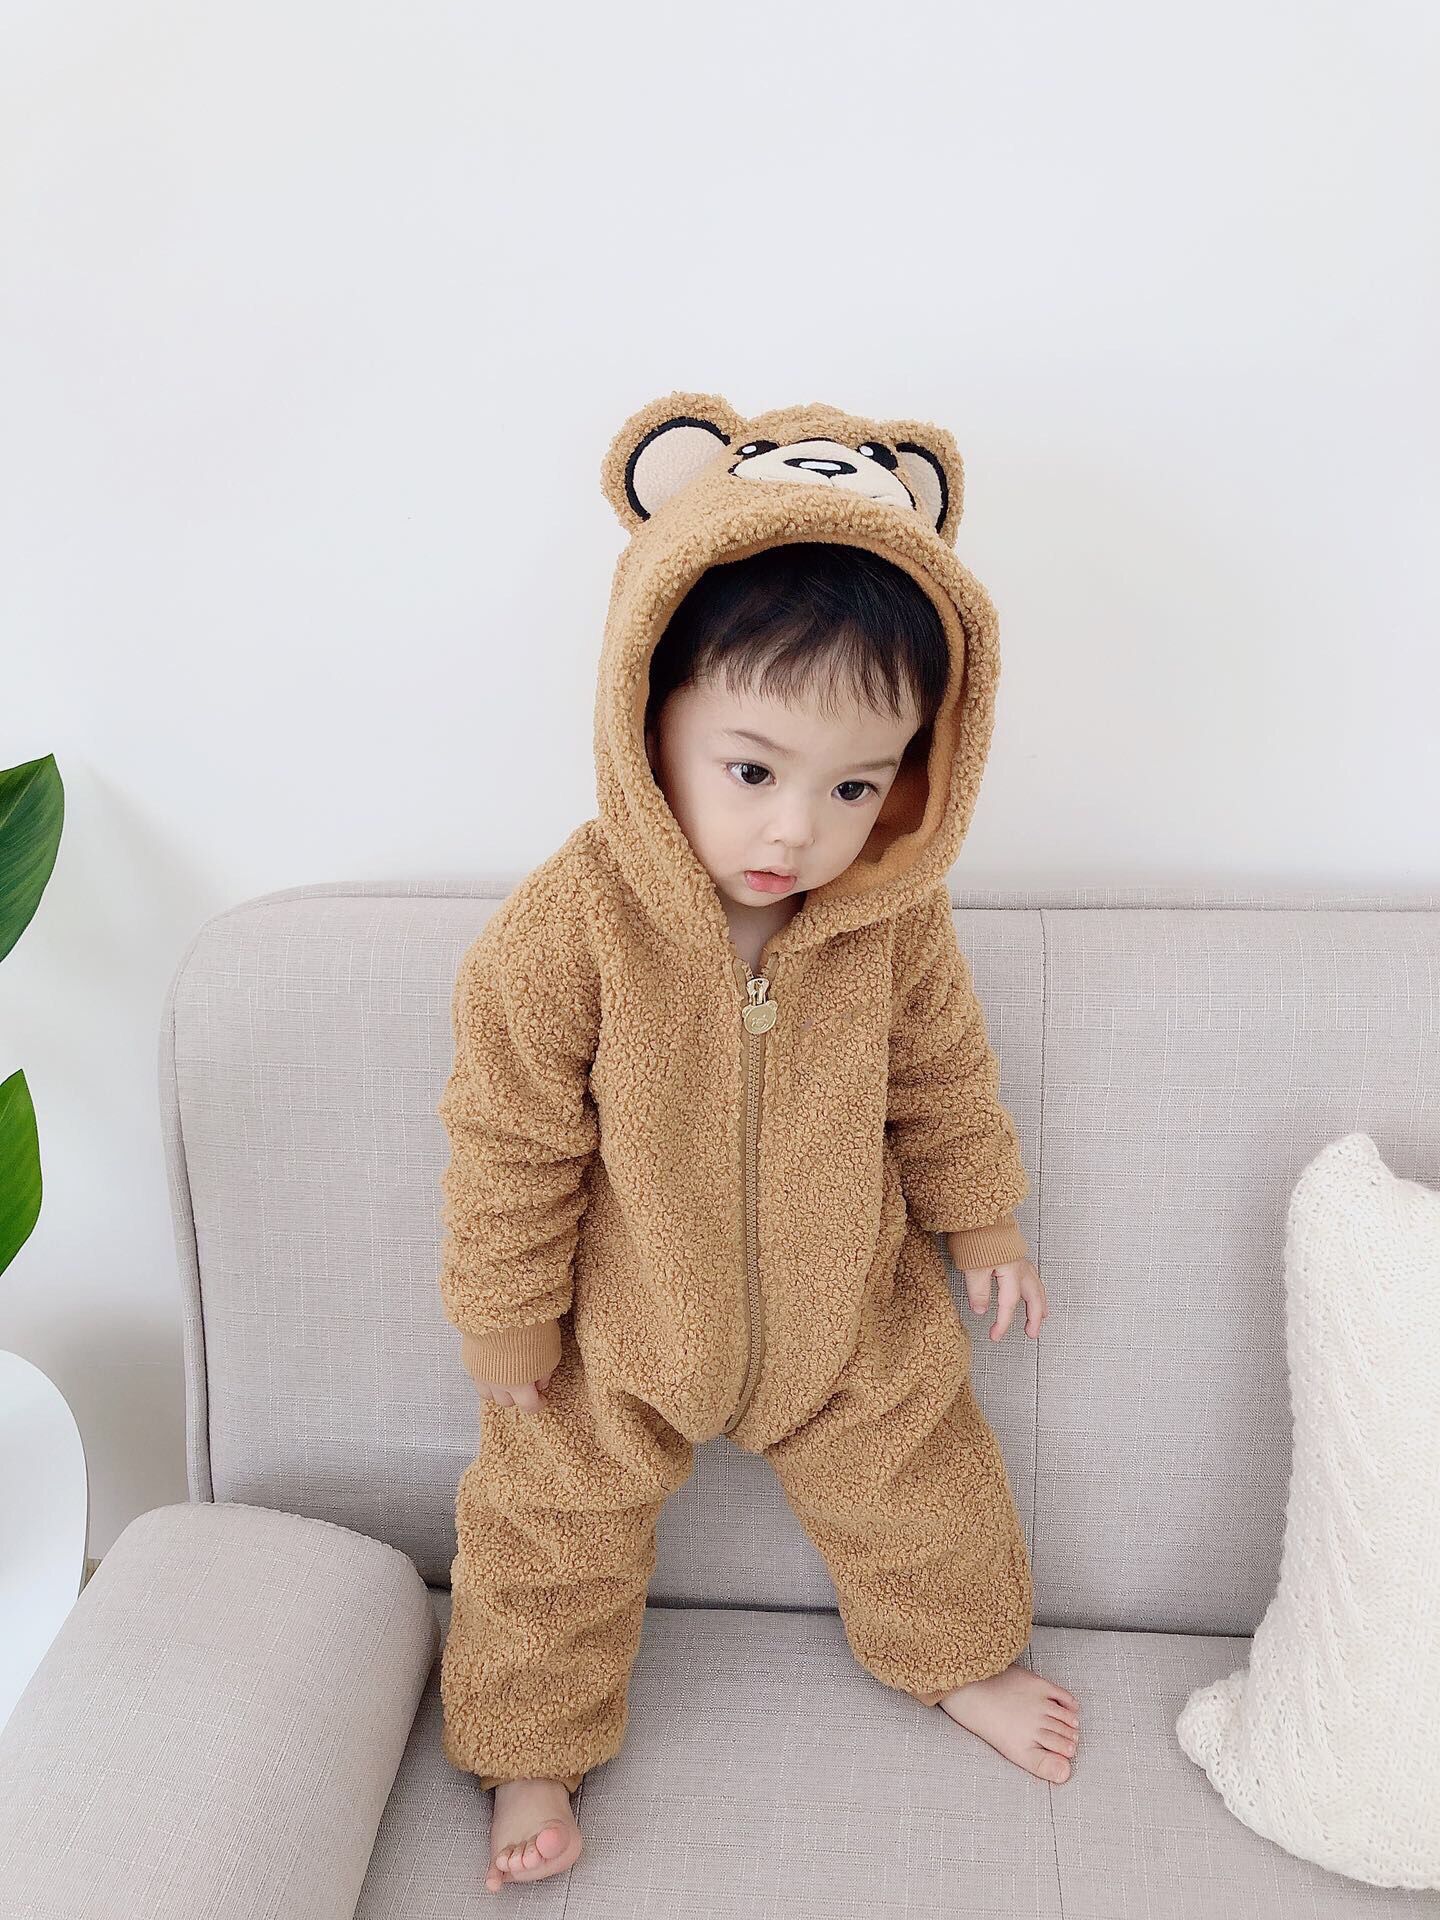 Unisex Baby Kid Winter Warm Romper Hooded Coat Jumpsuit Toddler Cute Clothes 